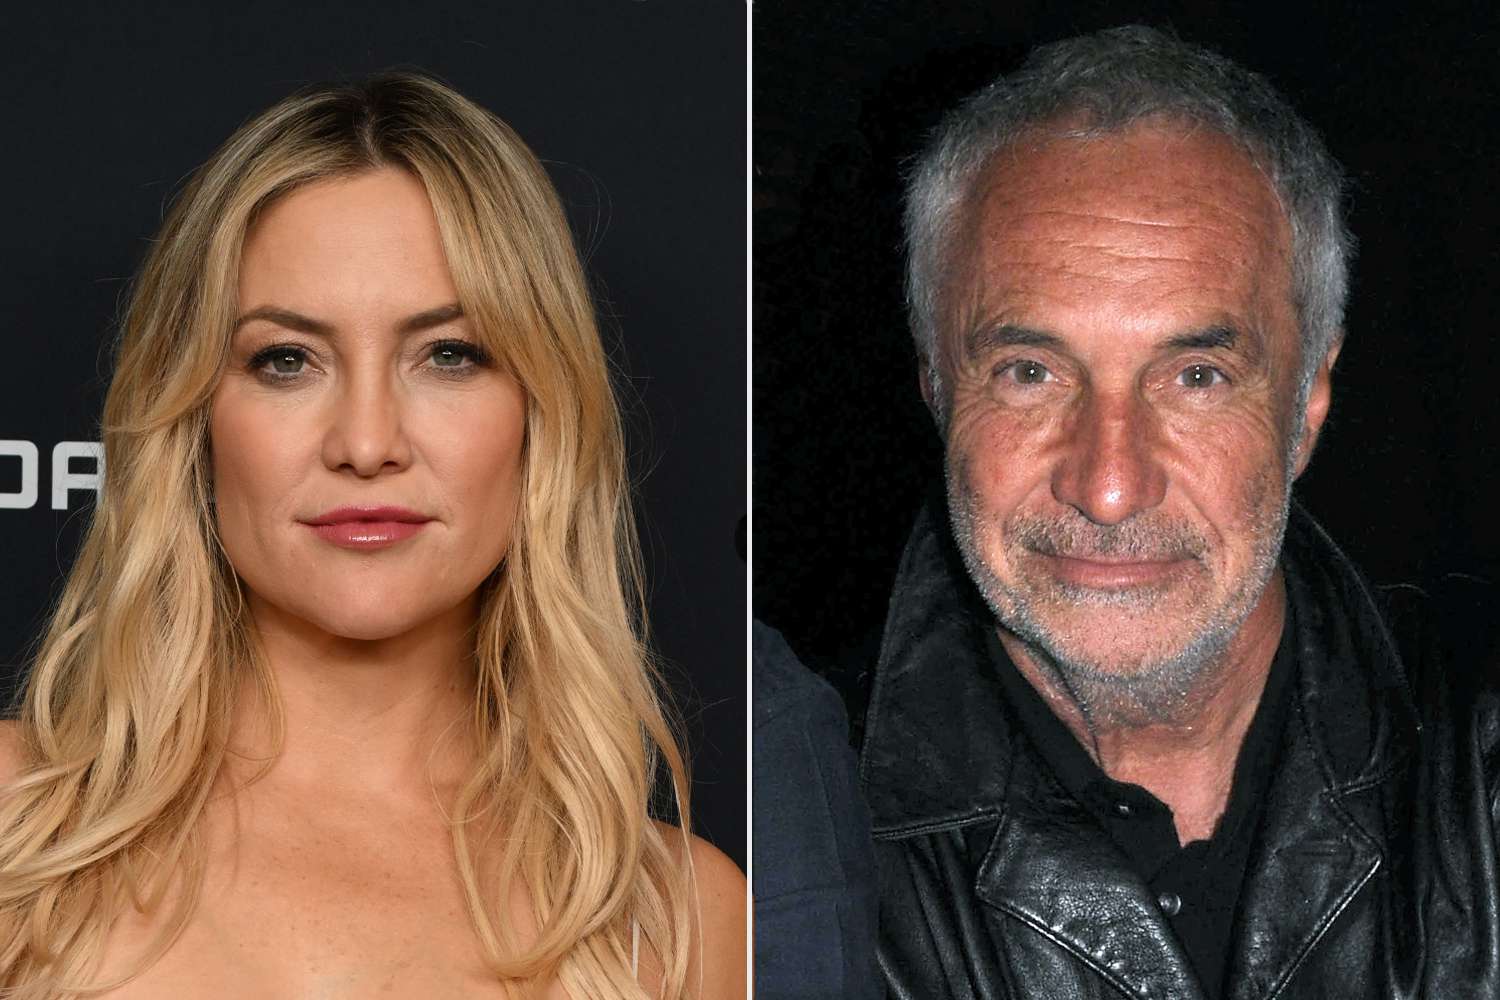 Kate Hudson Says Her Relationship with Her Father Bill Hudson Is 'Warming Up': 'I Have No Expectation'